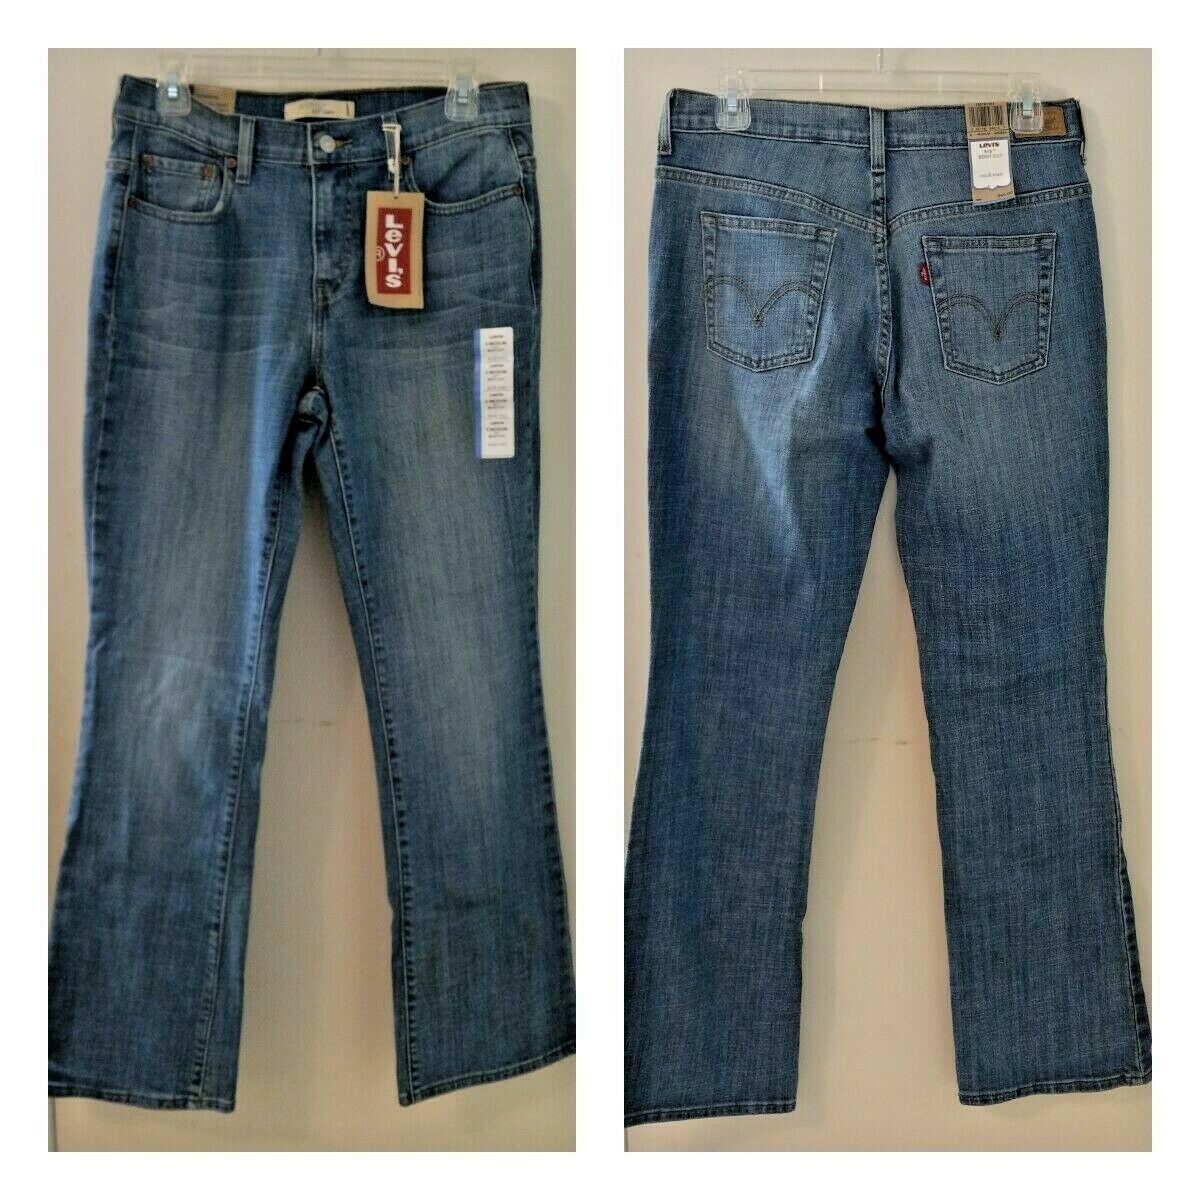 Women's Levis Jeans 515 Boot Cut Size 6 Med.  Misses Mid Rise Med Wash Denim NWT